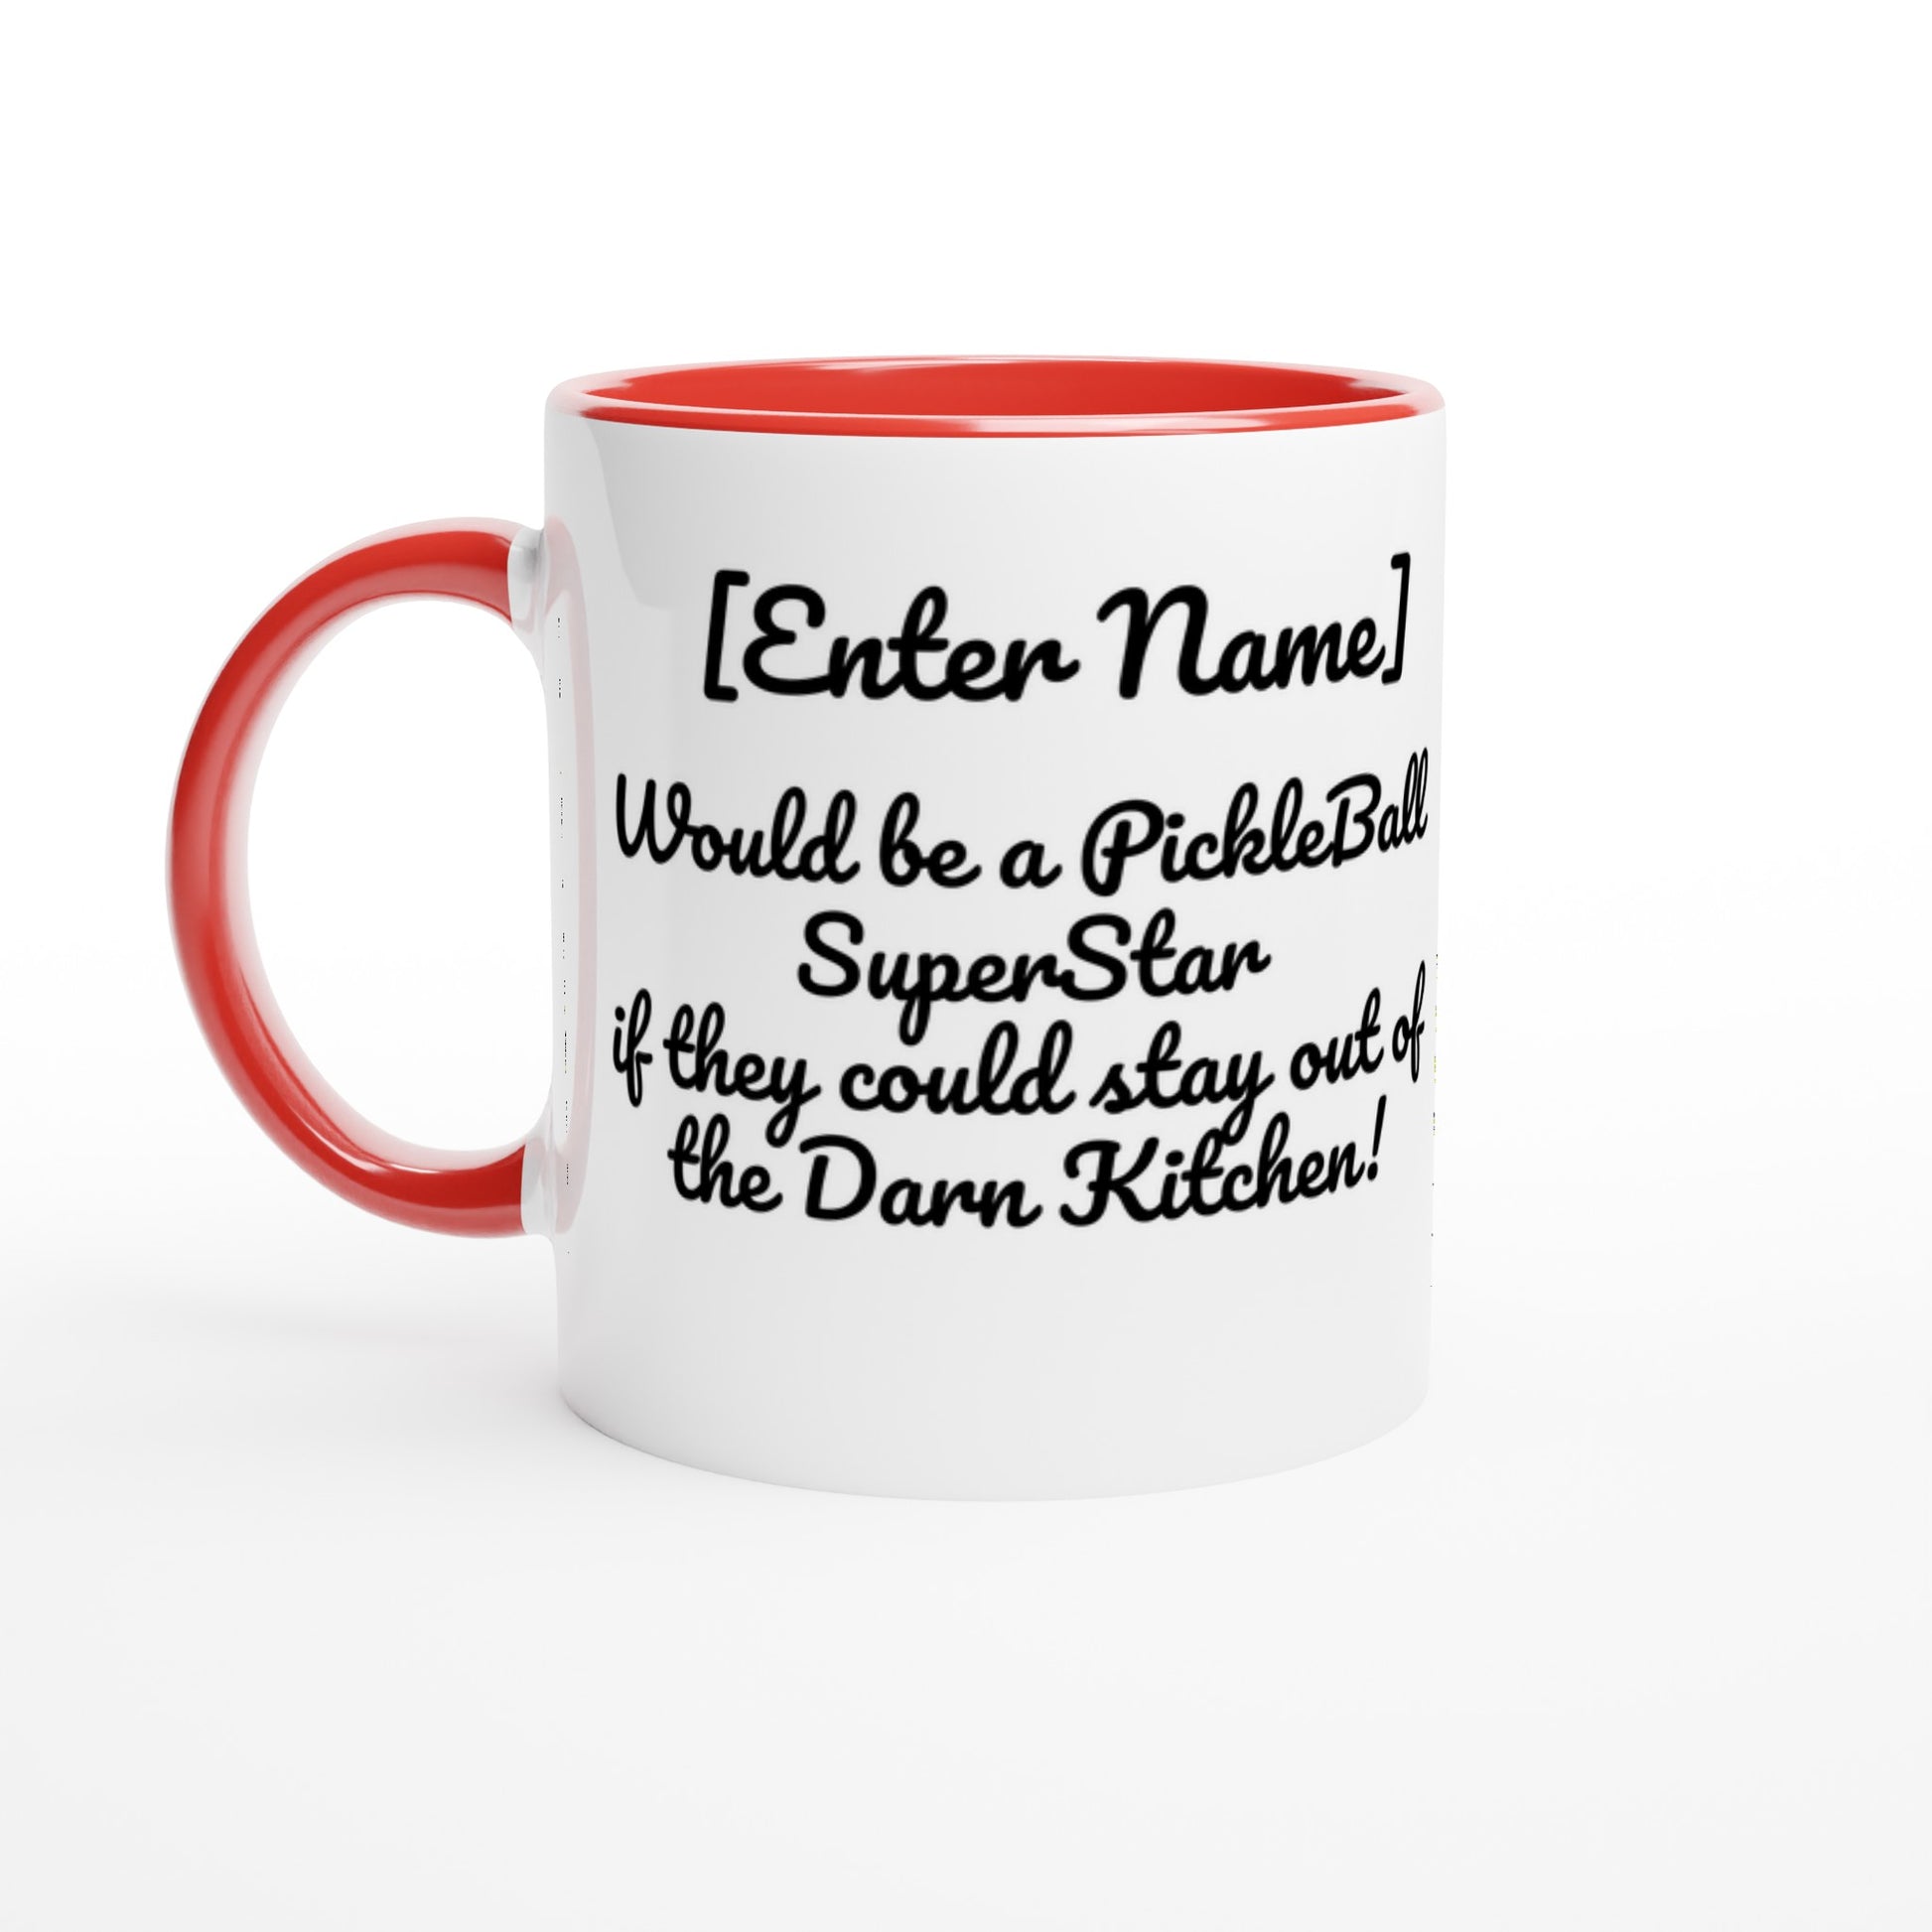 Personalized White ceramic 11oz mug with red handle Personalized with motto Your Name Would be a PickleBall Superstar if they could stay out of the Darn Kitchen front side Let's Play PickleBall logo on back dishwasher and microwave safe ceramic coffee mug from WhatYa Say Apparel front view.